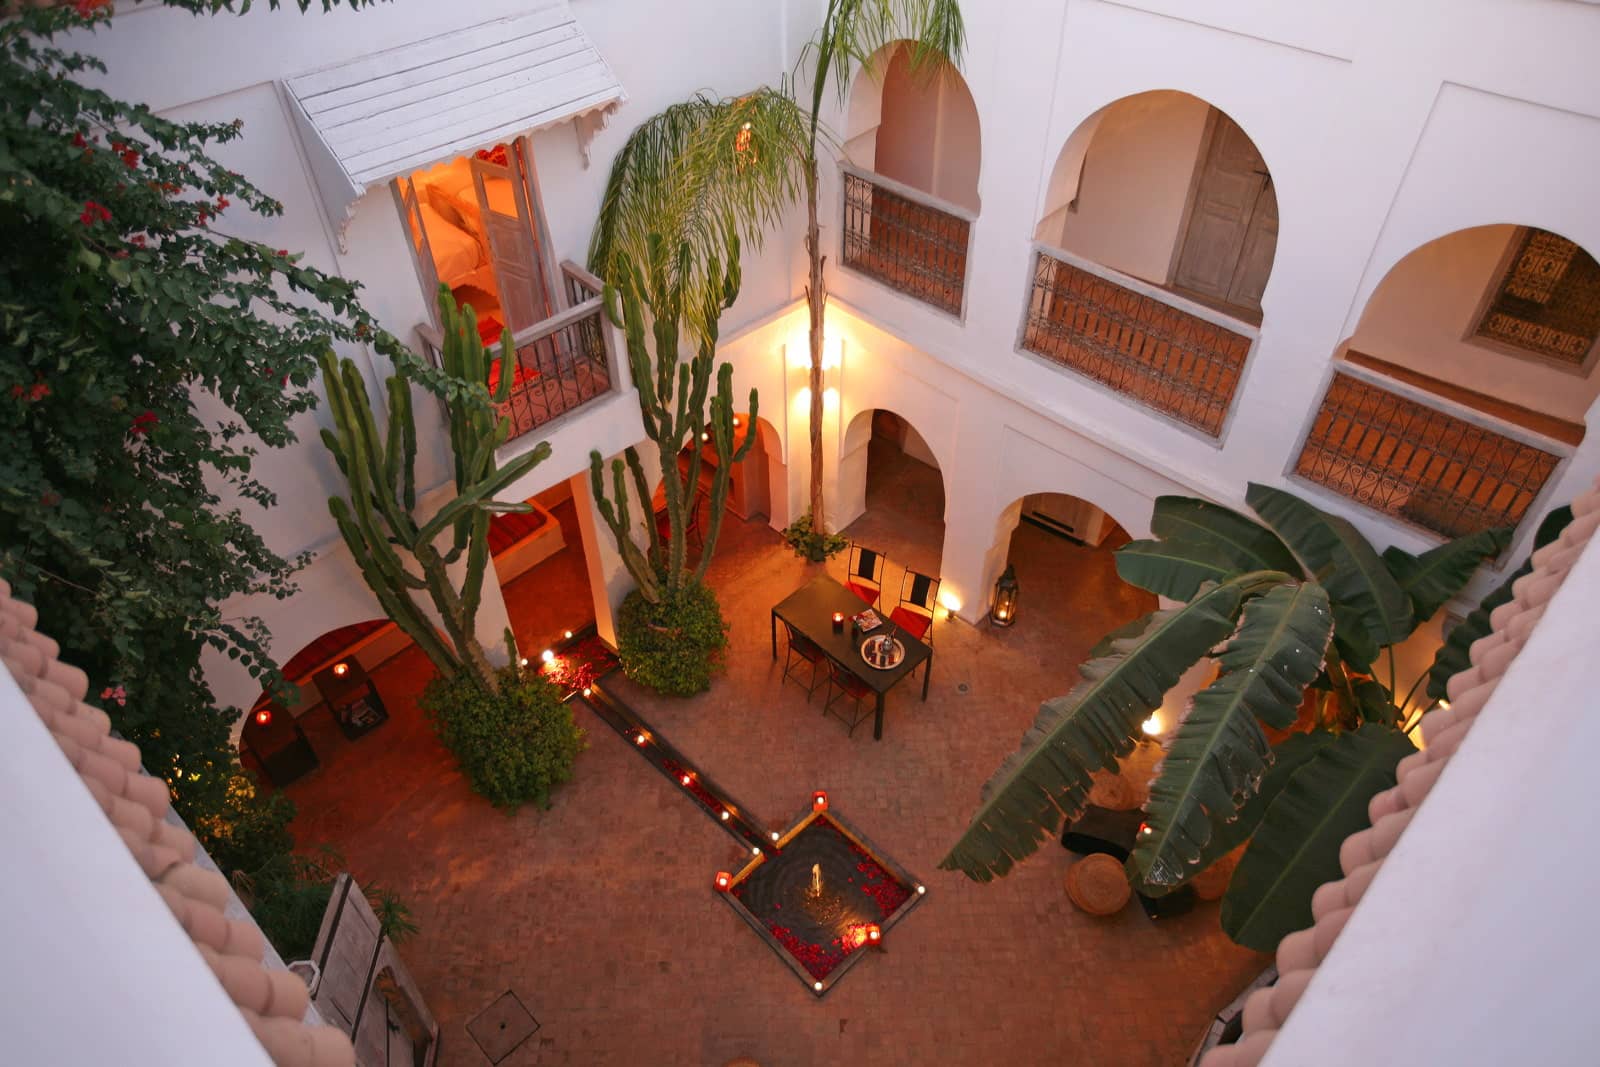 Moroccan courtyard with plants